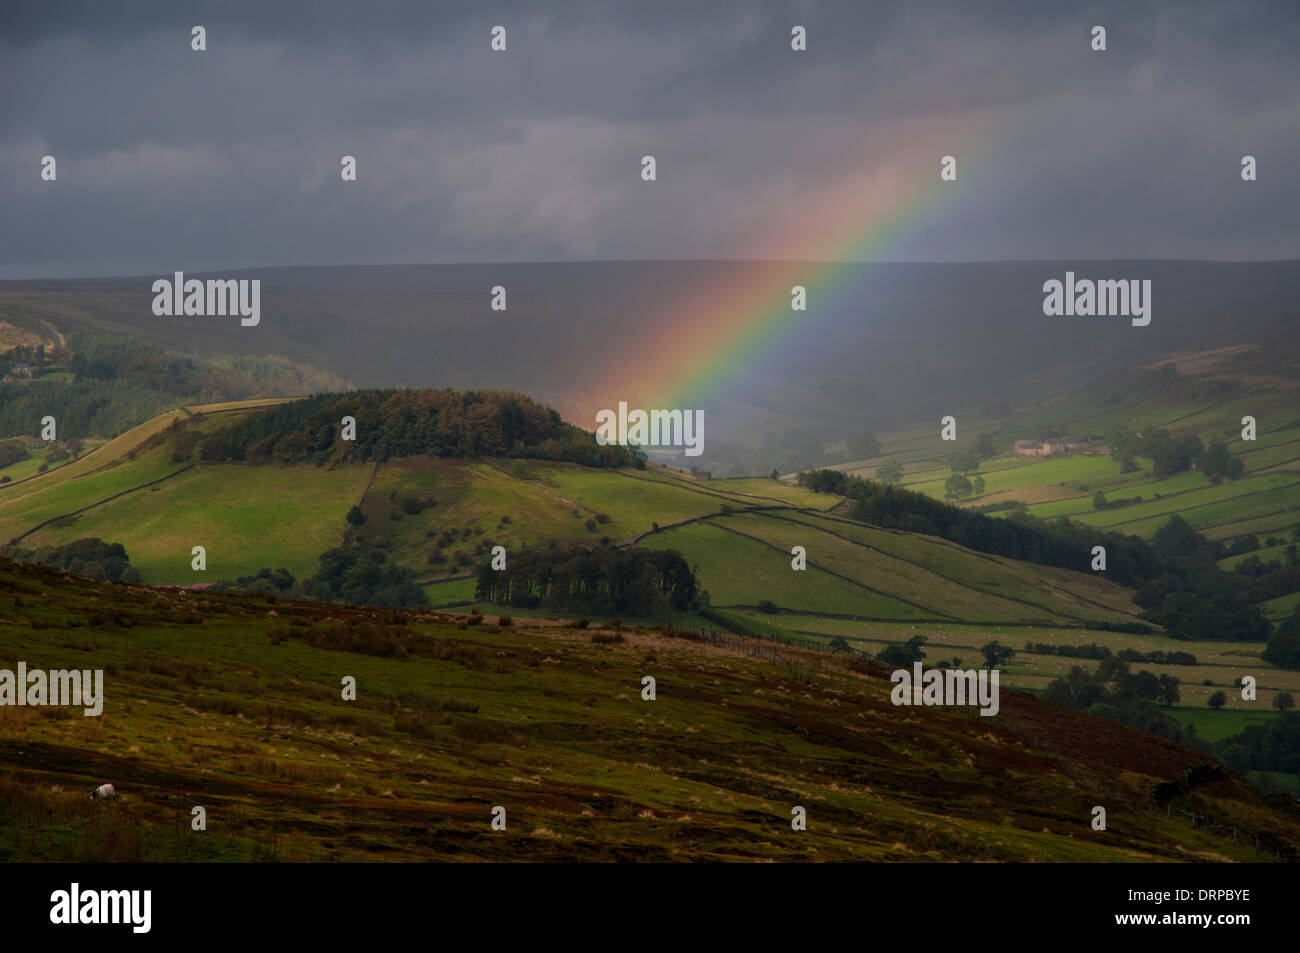 Rain clouds and a rainbow over Rosedale as seen from Chimney Bank at the edge of Spaunton Moor in the North York Moors NP Stock Photo